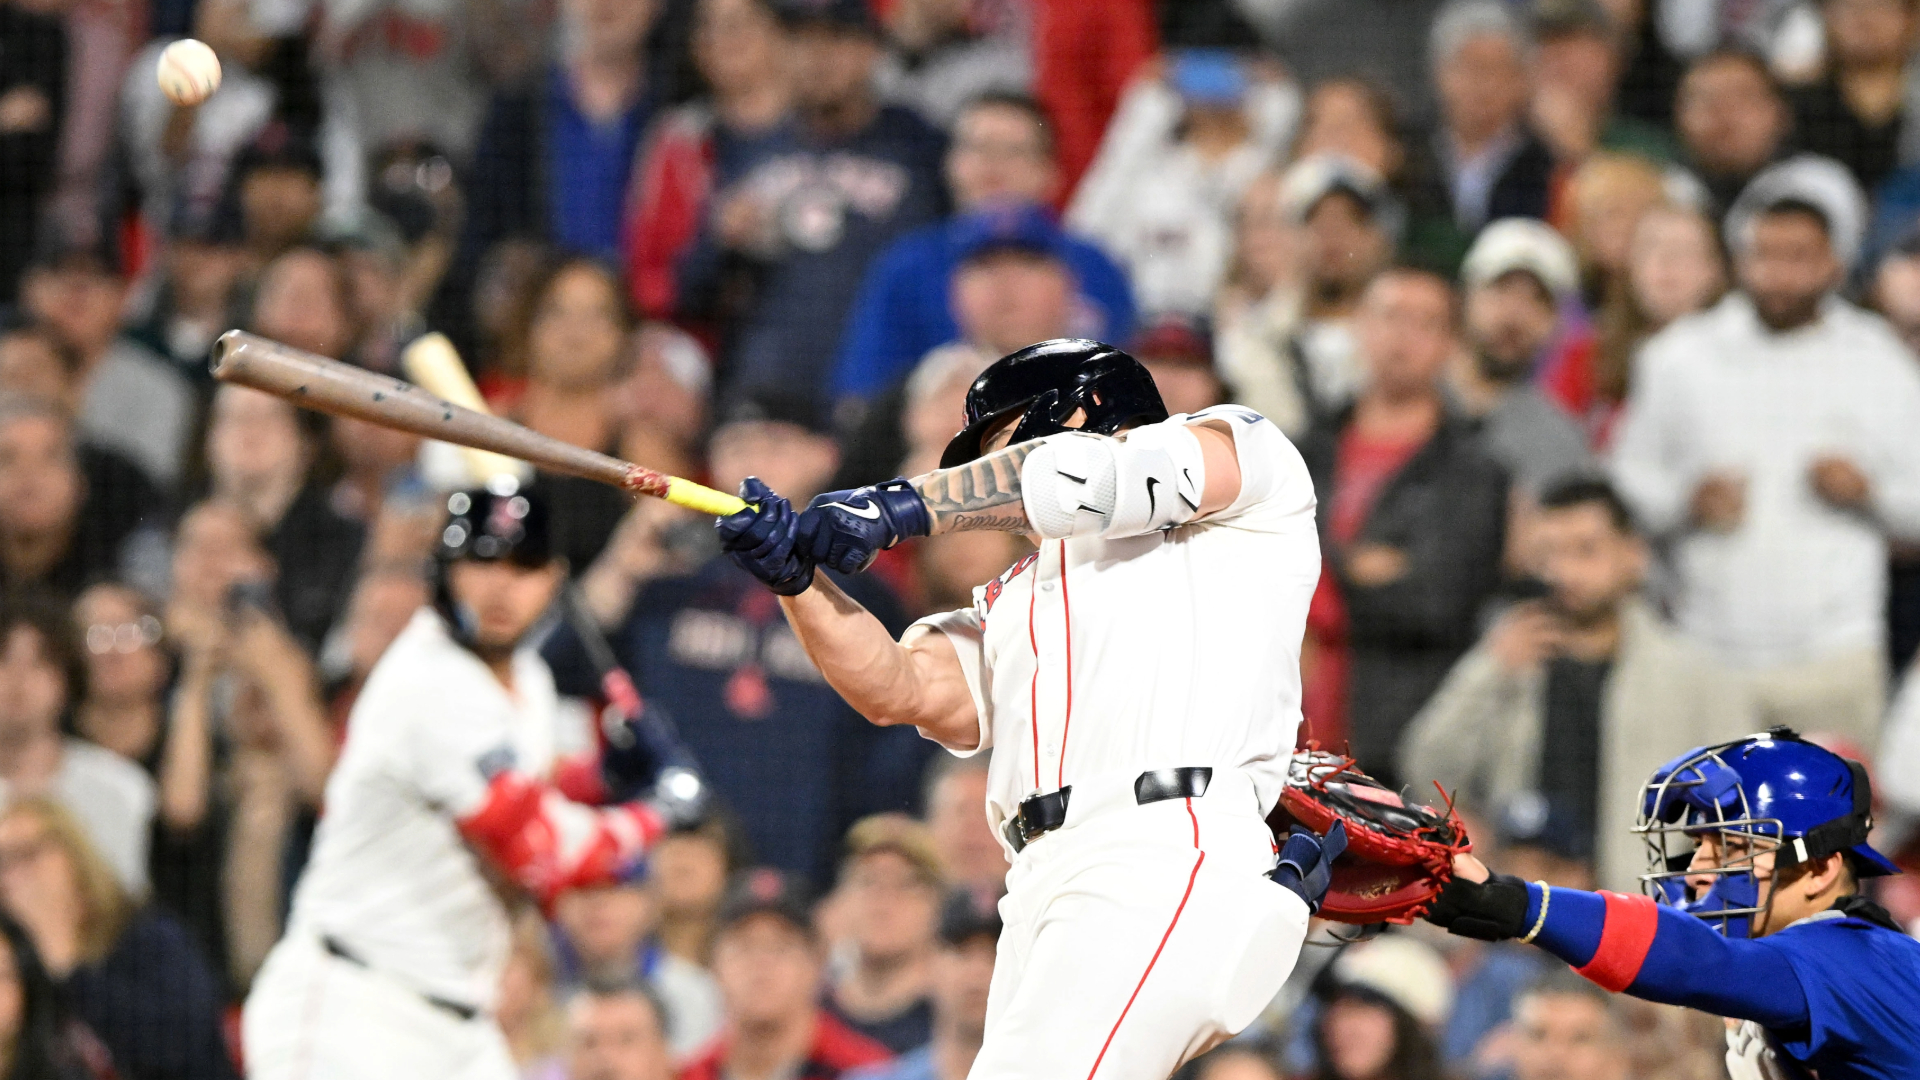 Red Sox Wrap: Boston Finishes Off Series Vs. Cubs In Walk-Off Fashion